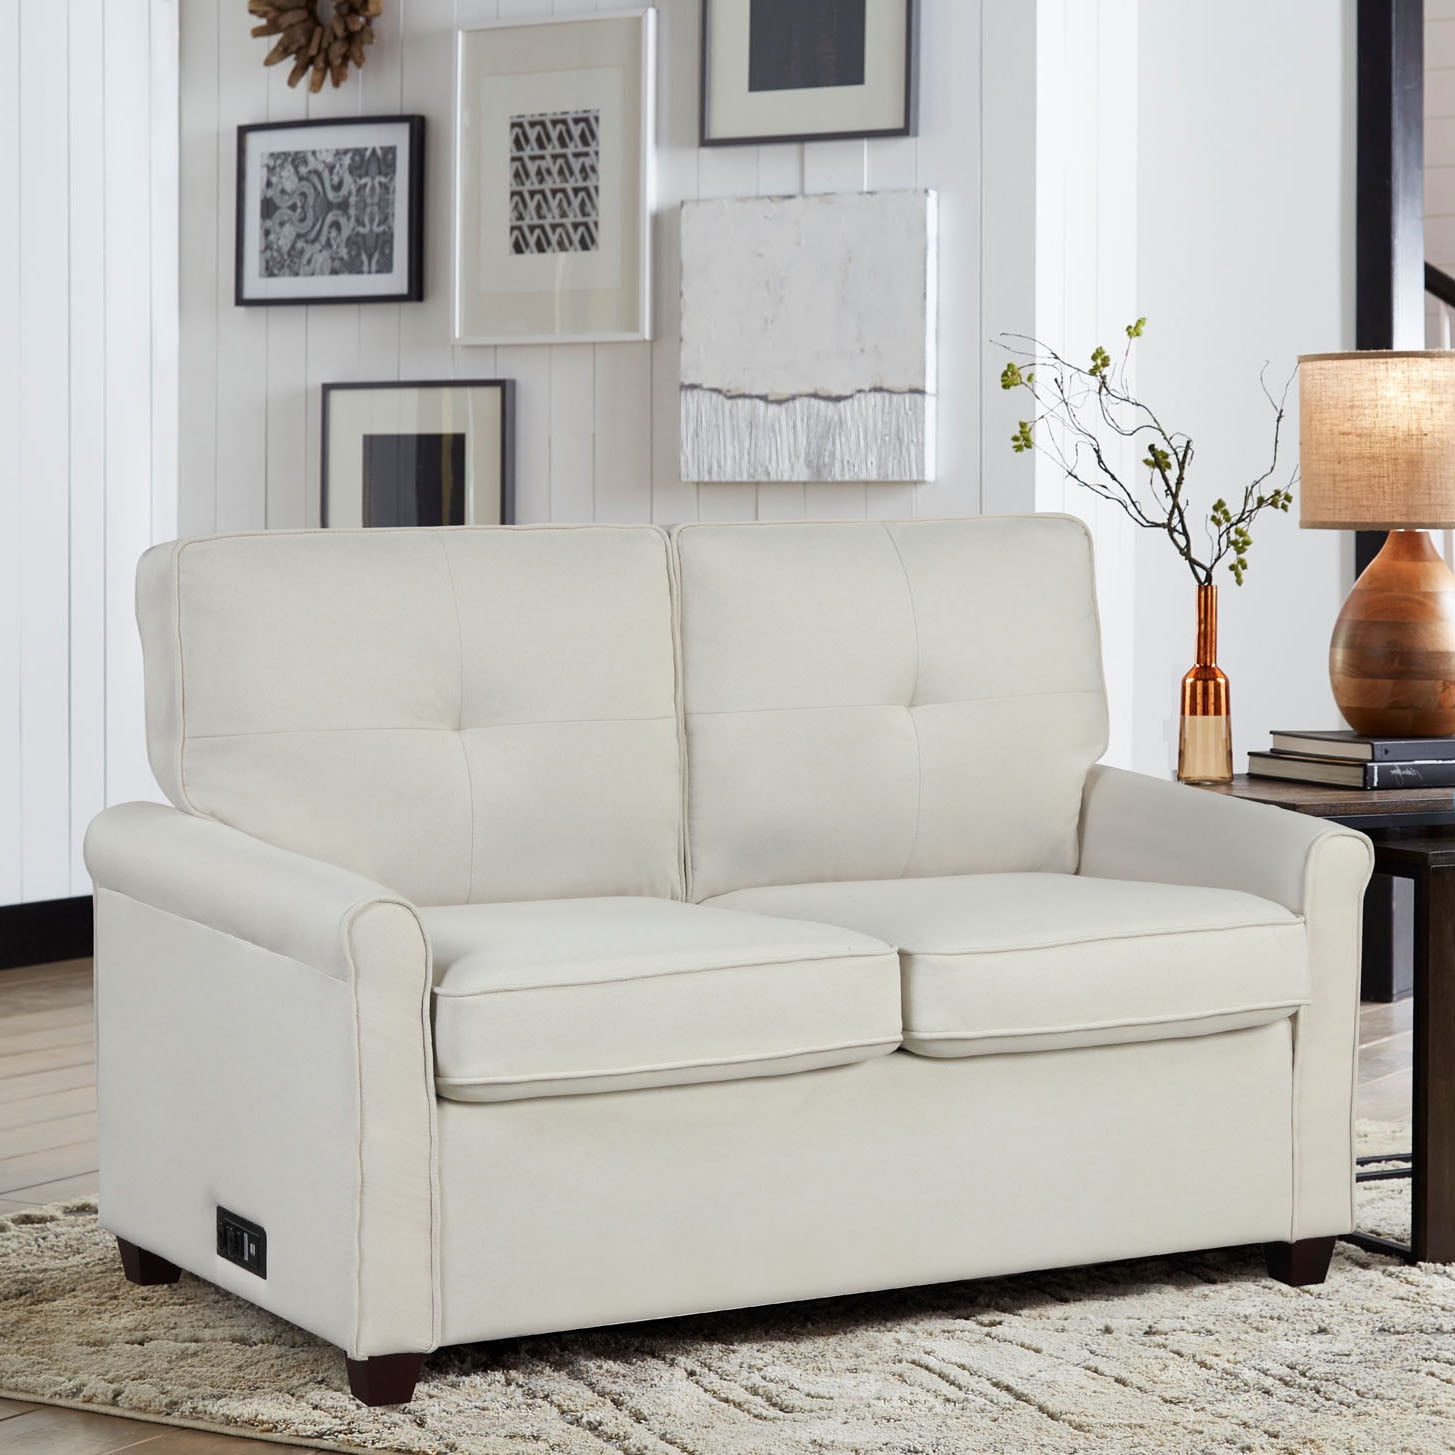 Linen Solutions Power, Look Anton Lifestyle Loveseat with Beige